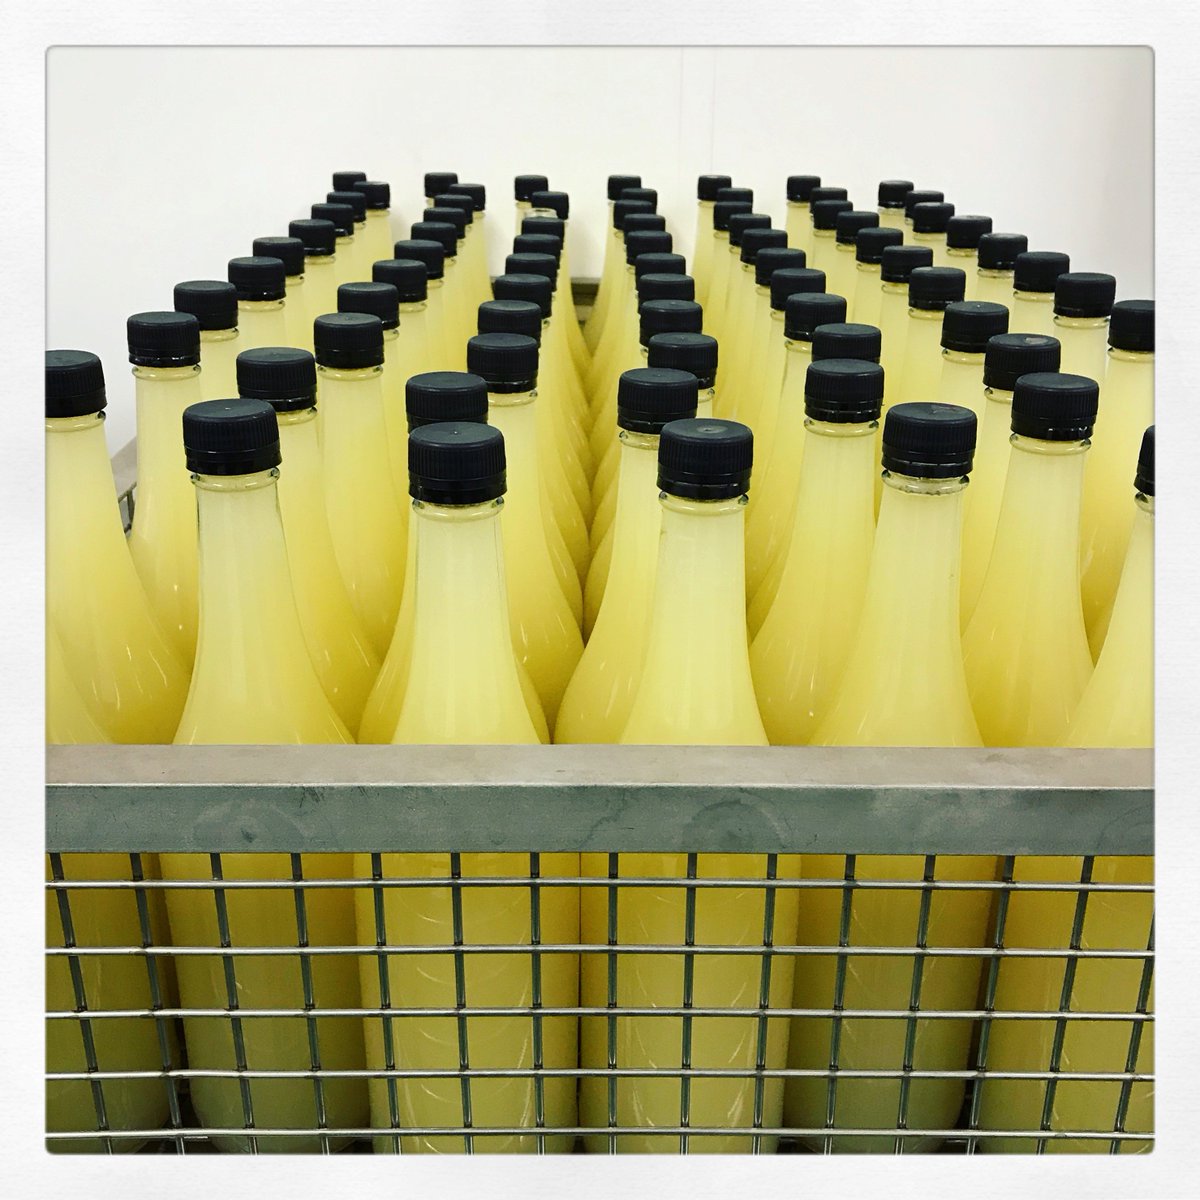 Our long-awaited #OriginalBramley juice is nearly back in stock! We have pressed & pasteurised this year’s naturally sweet #BramleyApples with their distinctive tangy taste & are ready to date-code, label & box. Watch this space! 😋🍏#GreatBritishApples #NoAddedSugar #AppleJuice